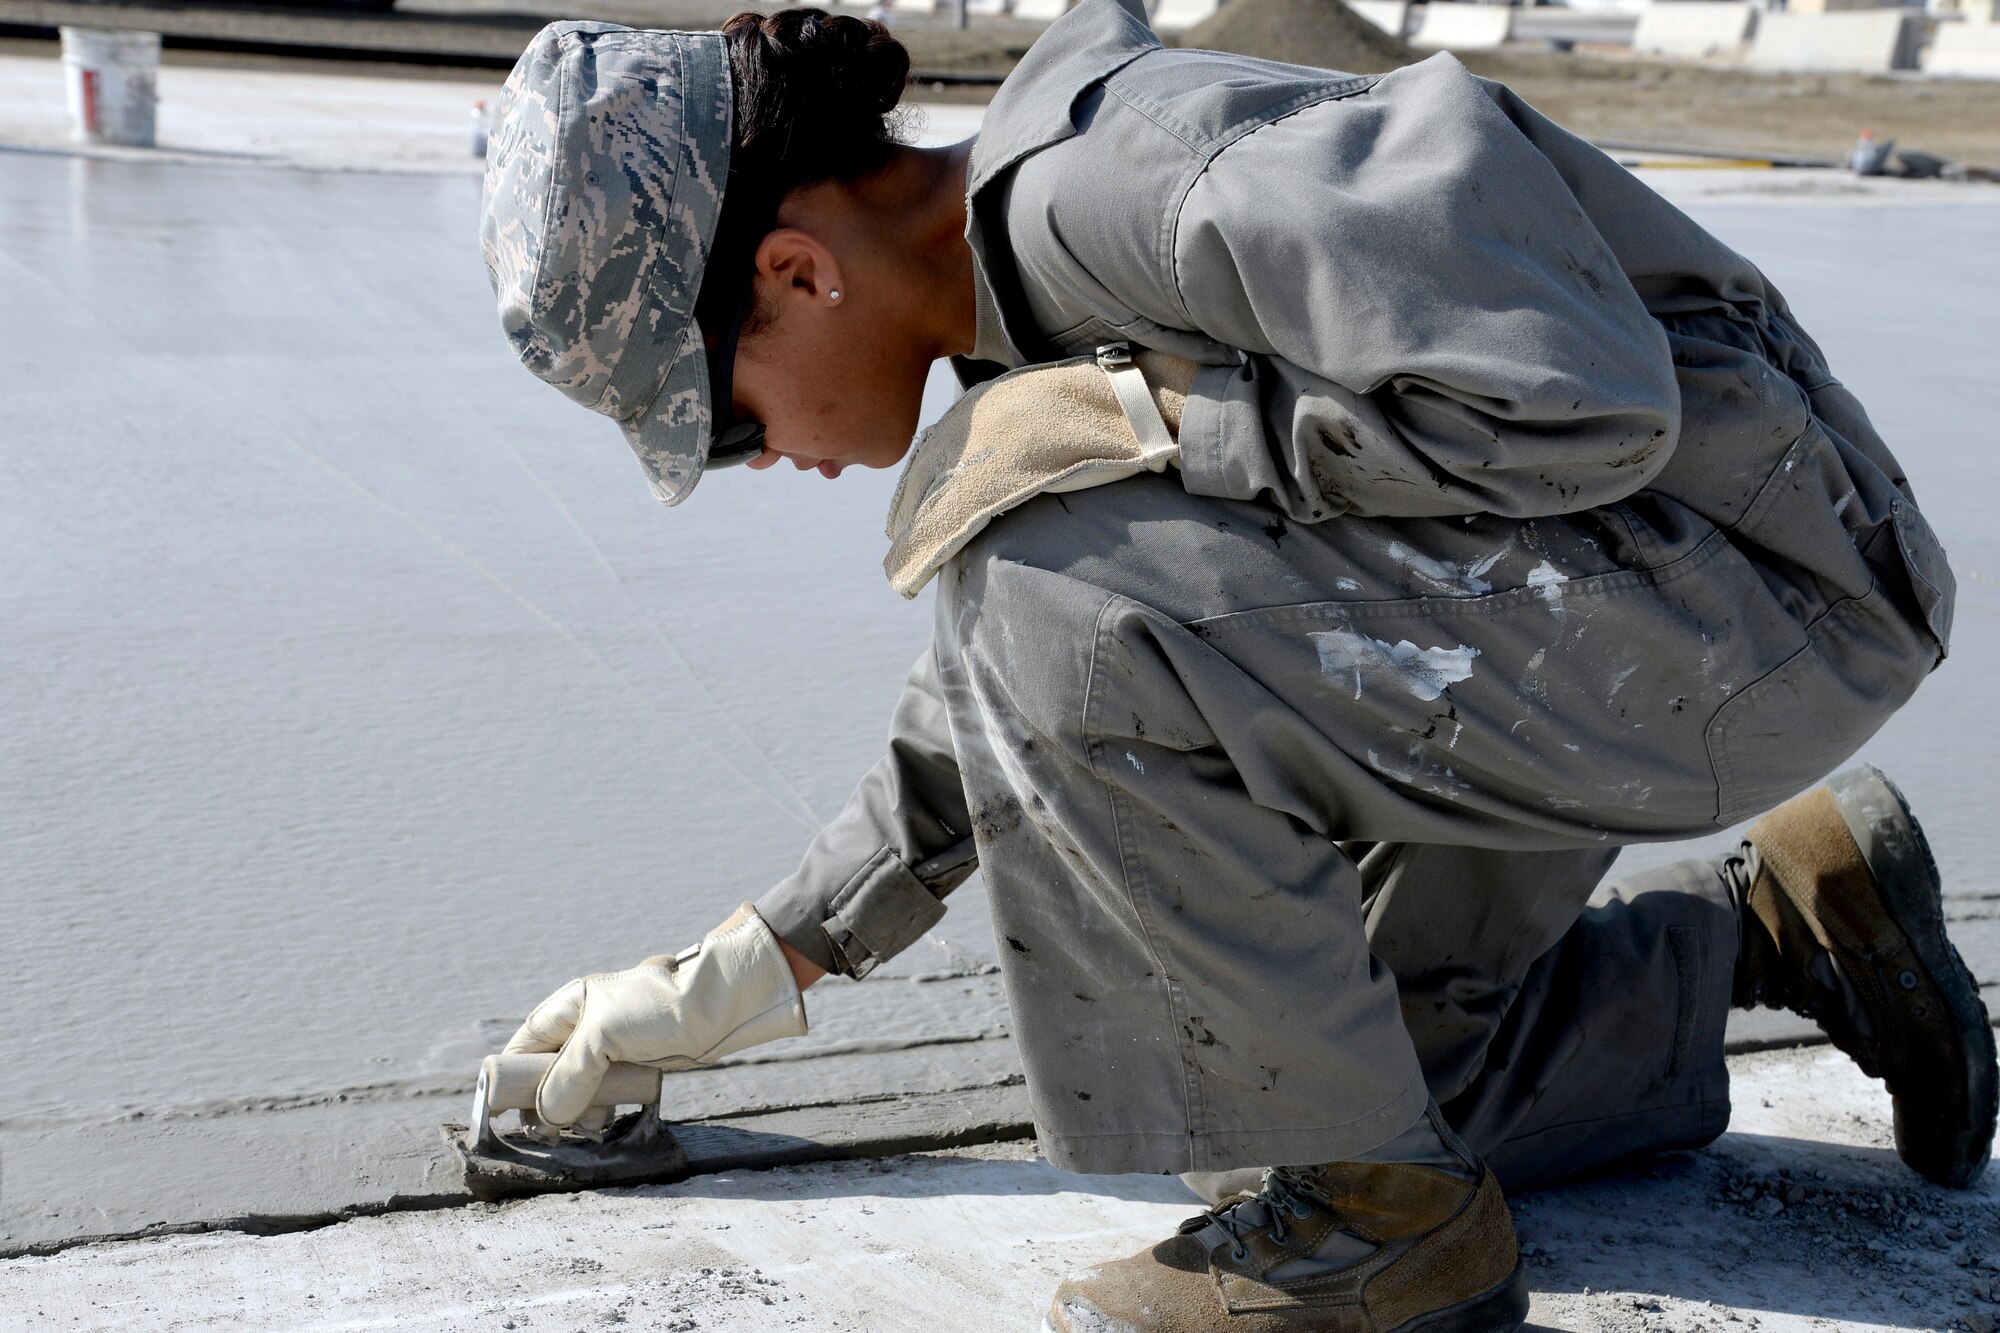 Senior Airman Any, Expeditionary Civil Engineer Squadron structural journeyman, smoothes the edges of fresh laid concrete at the Australian beddown site on an undisclosed location in Southwest Asia Oct. 30, 2014. Airmen with the ECES worked side-by-side with their Australian counterparts to construct 35 tents. (U.S. Air Force photo/Tech. Sgt. Marie Brown)